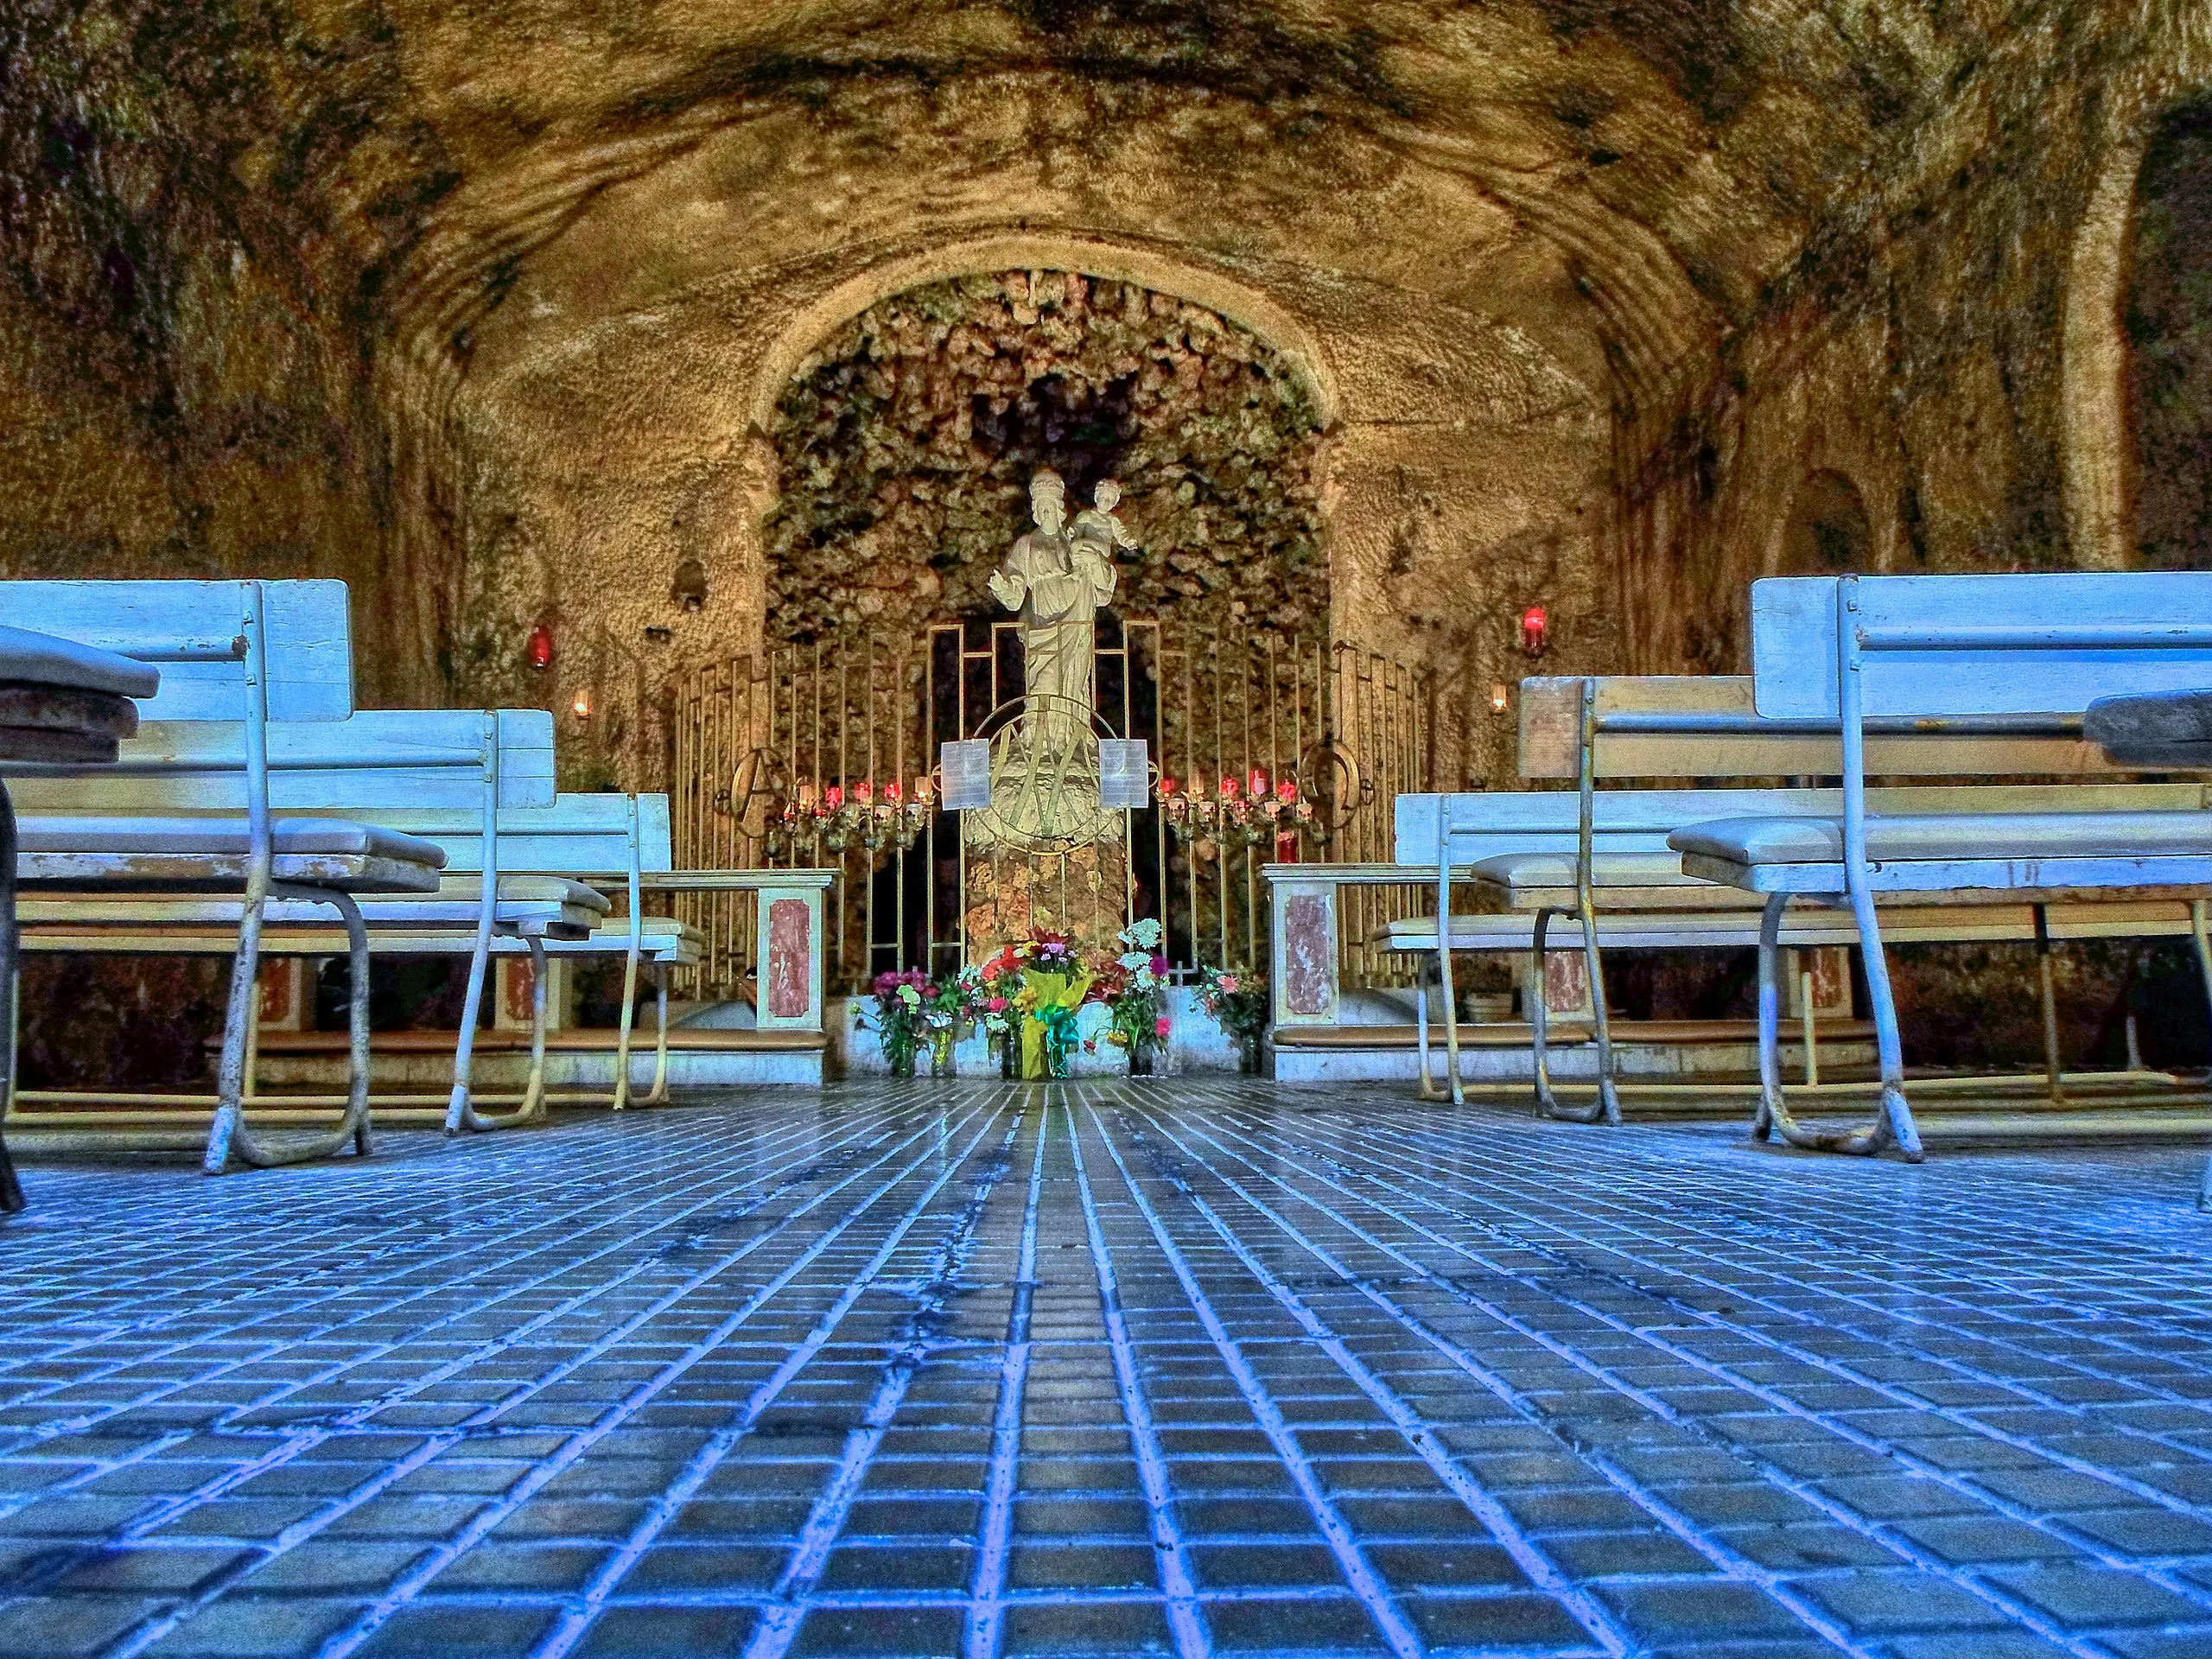 Our Lady Of The Grotto in Malta, Europe | Architecture - Rated 0.8